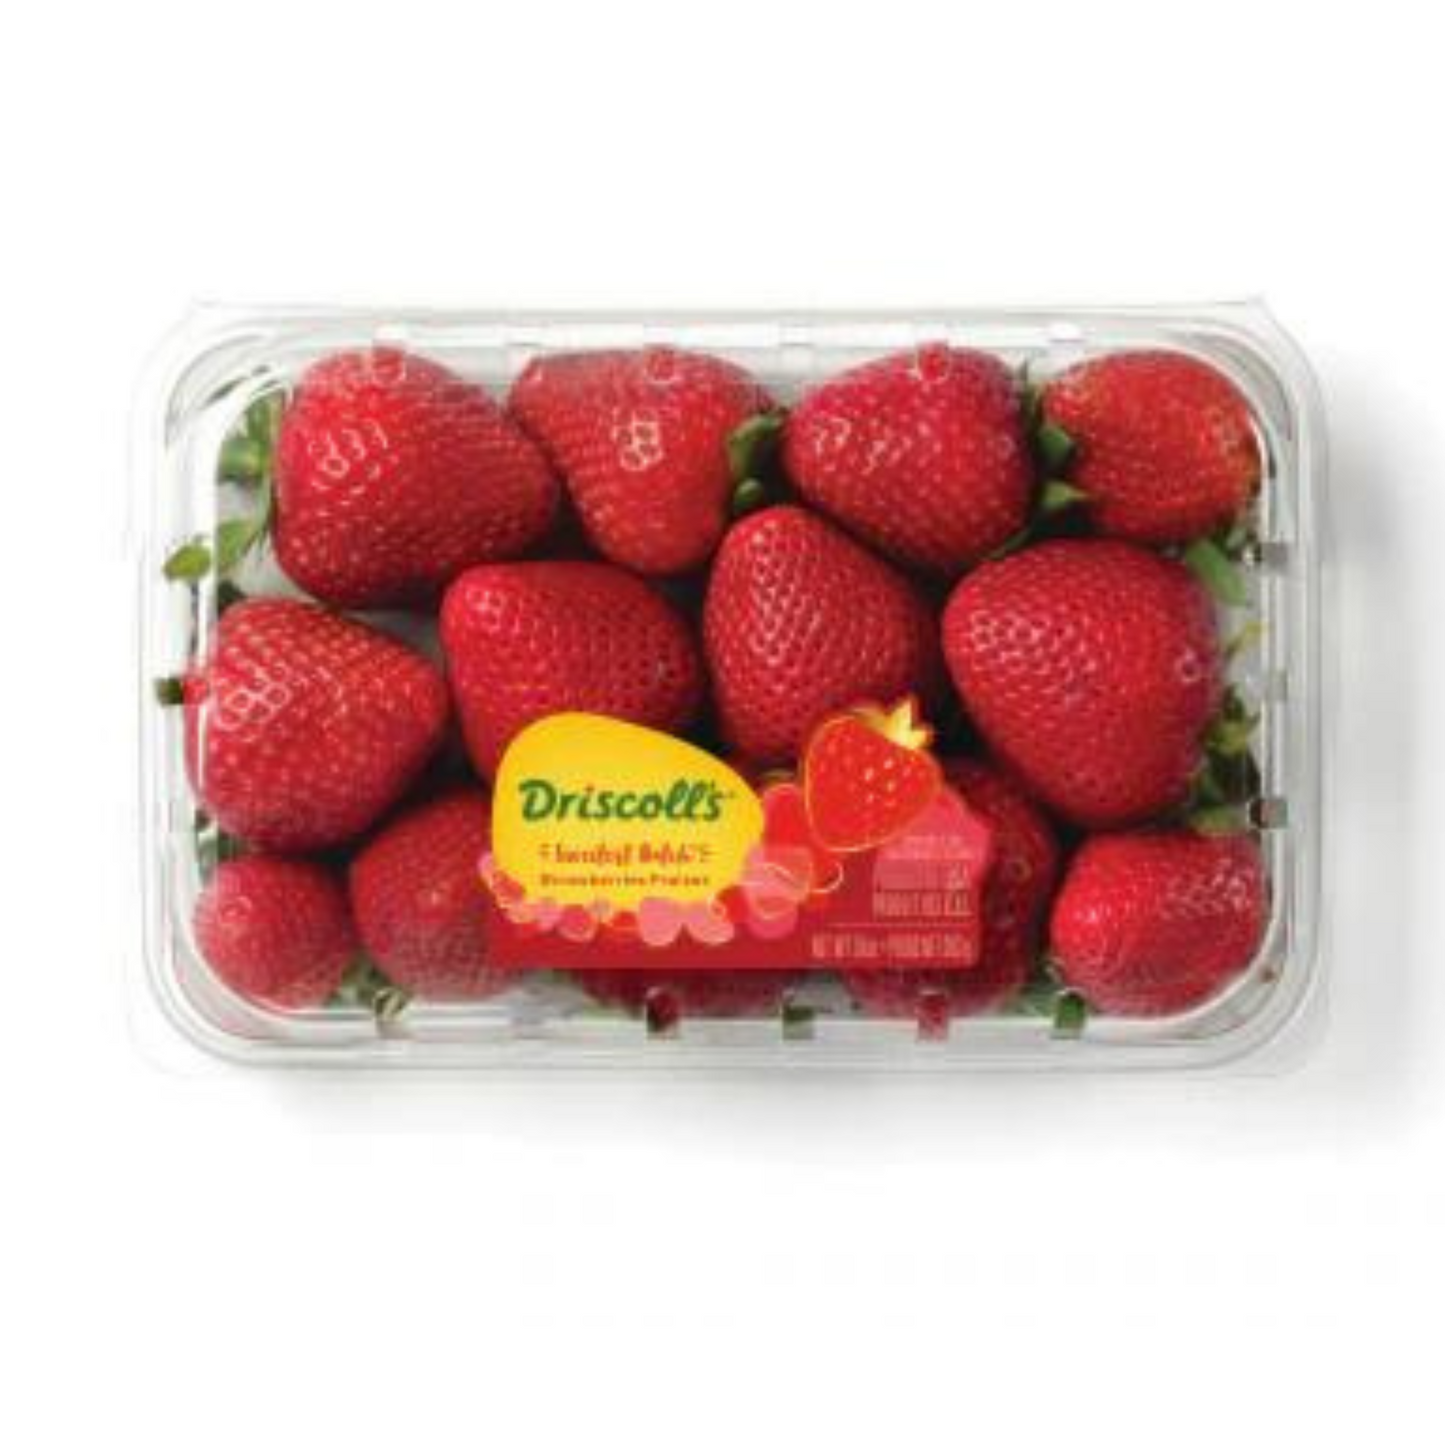 Driscoll's Sweet Strawberries